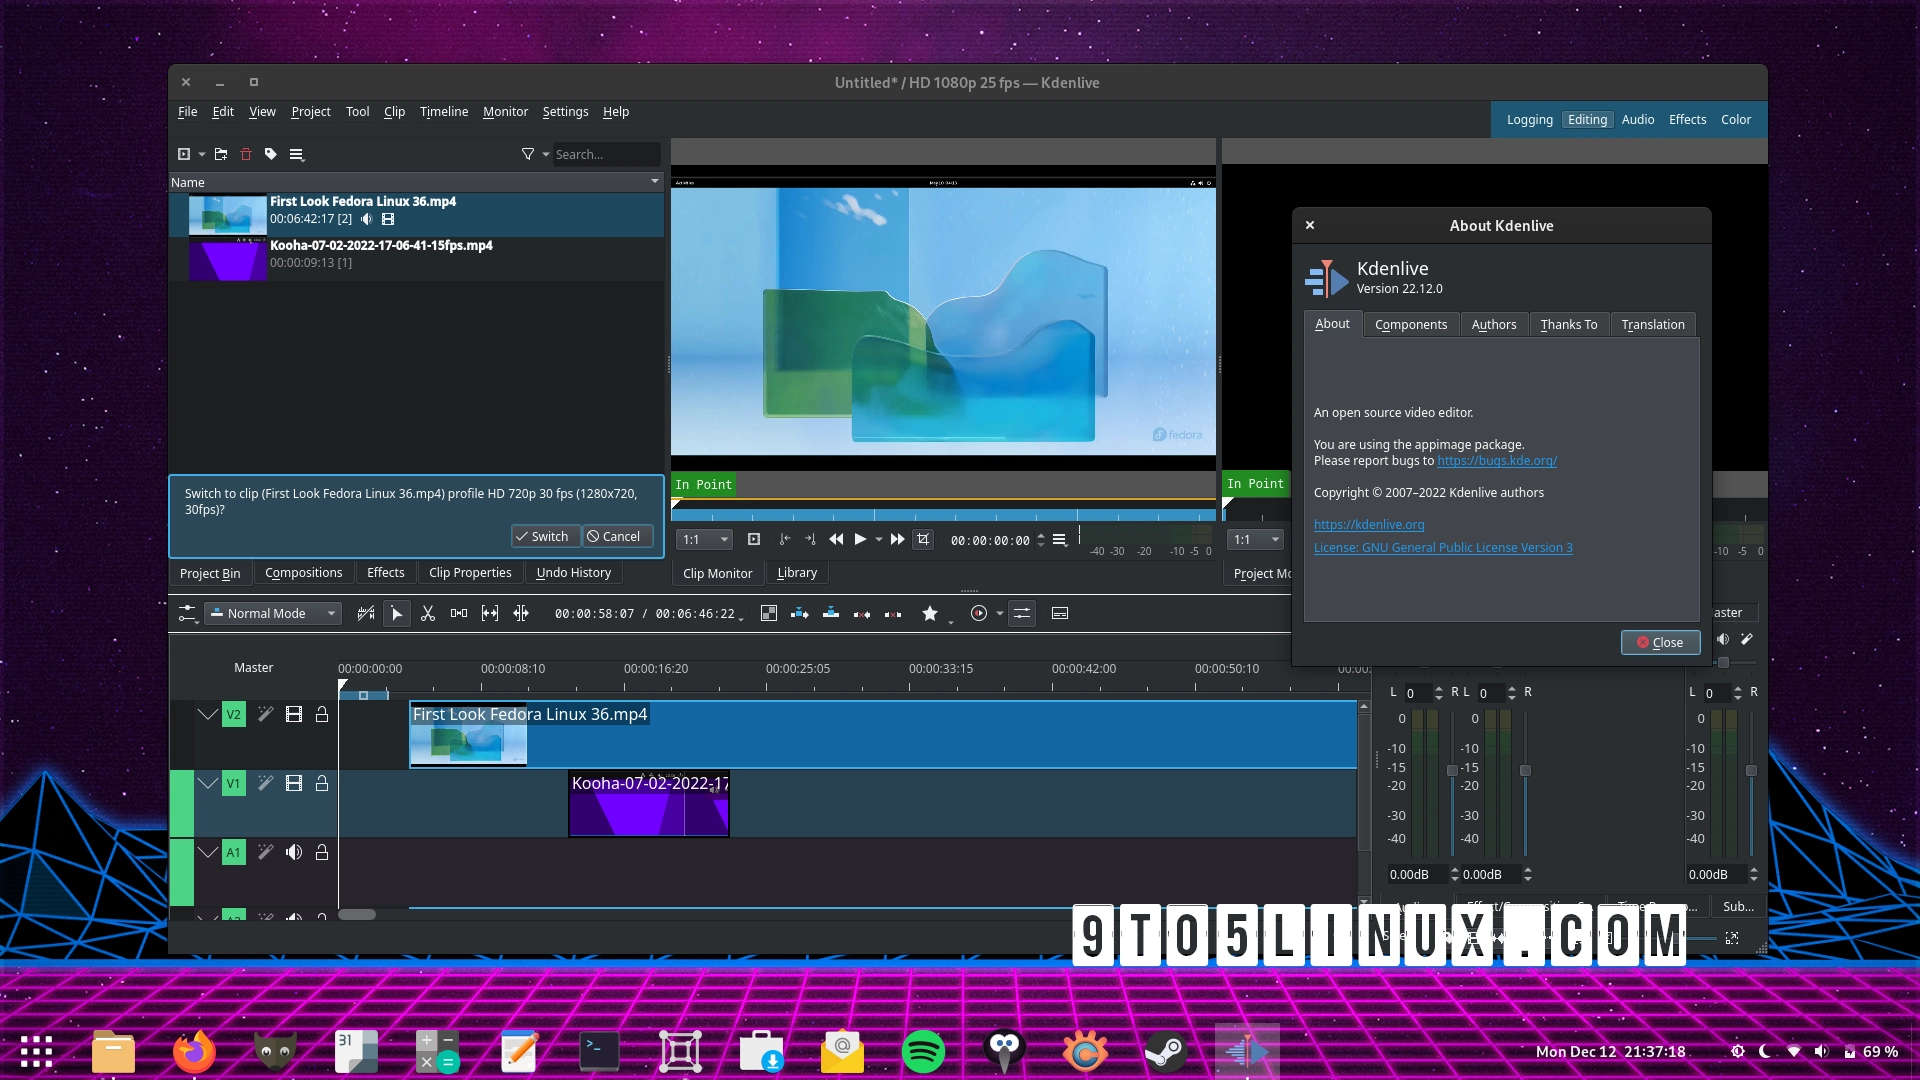 Latest Kdenlive Video Editor Release Brings Major Overhaul to Guide/Marker System, More